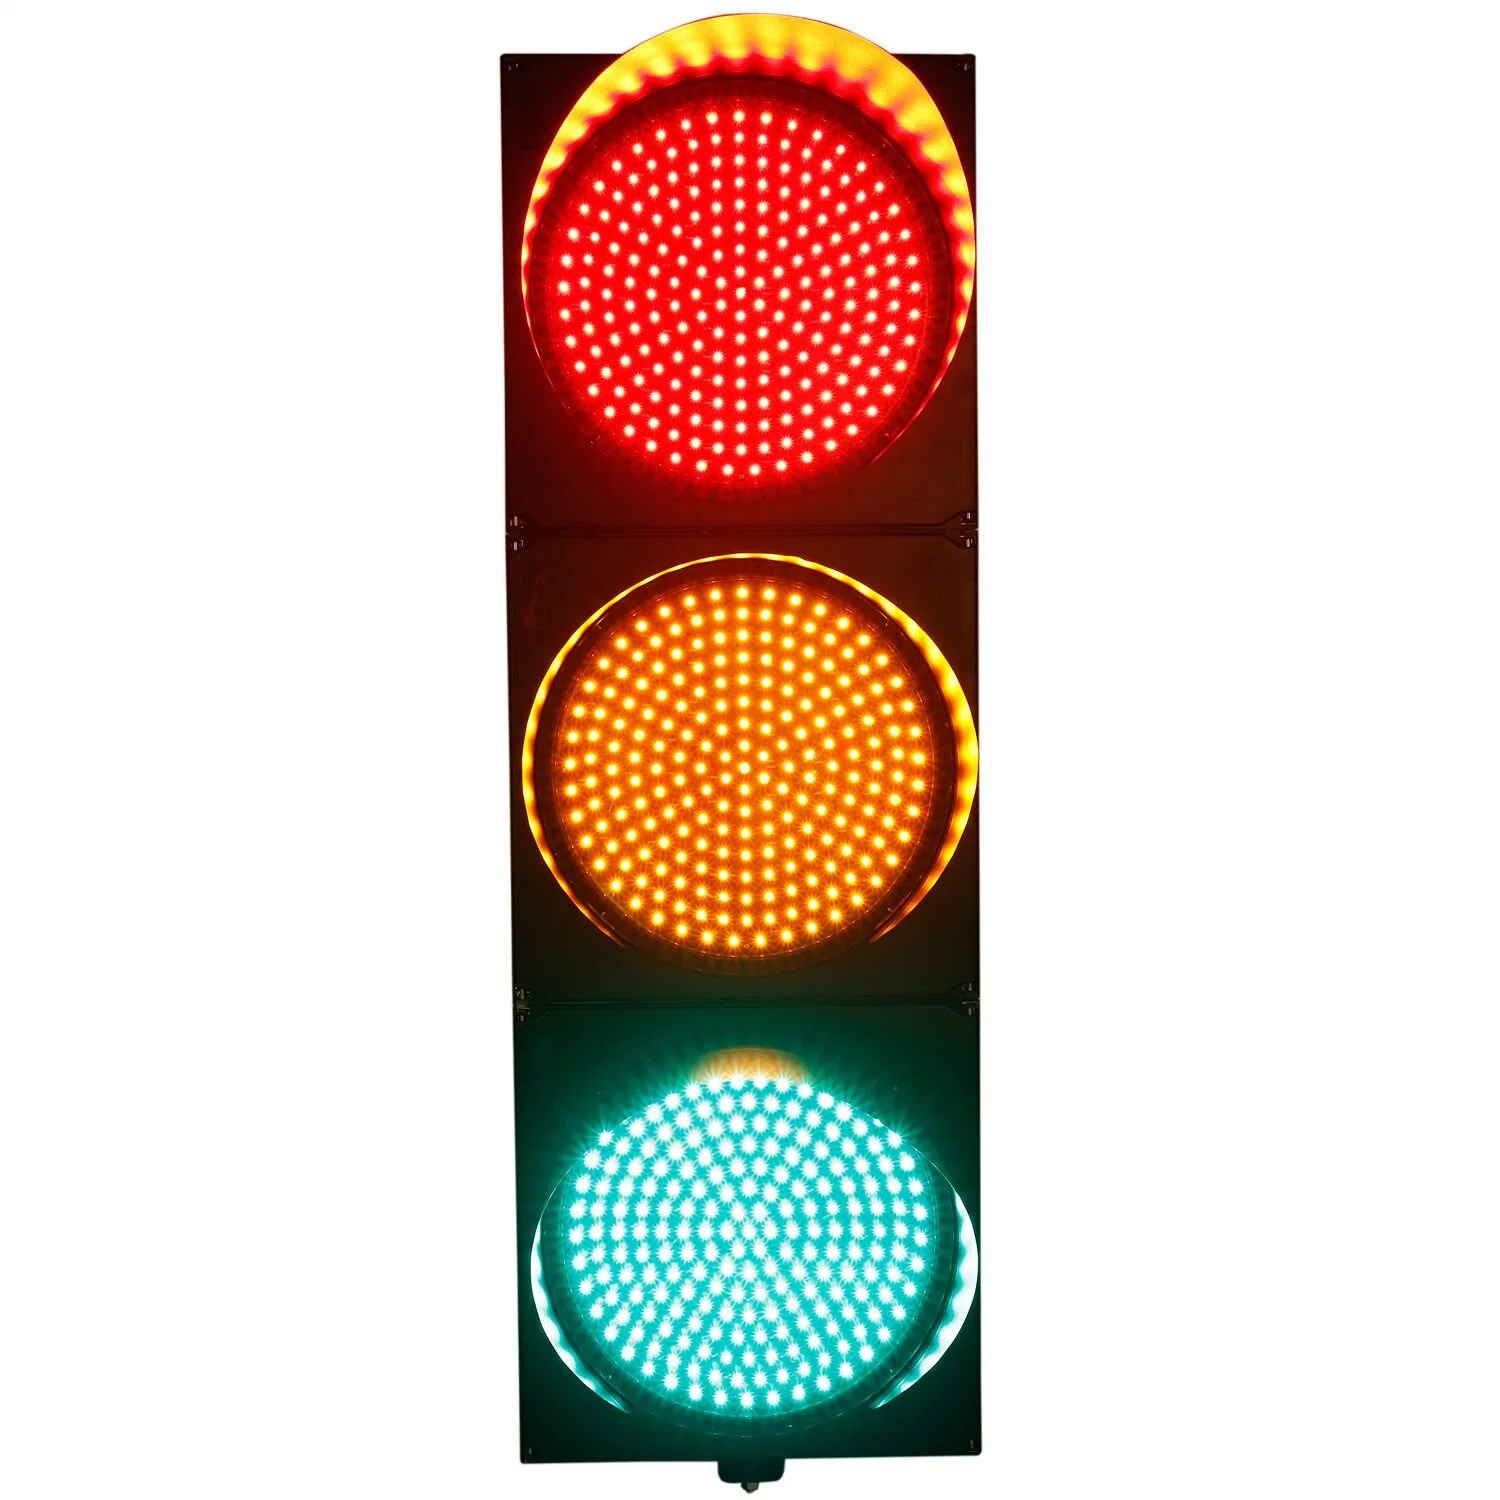 Traffic Light Warning Light Red and Amber and Green Color Traffic Lamp